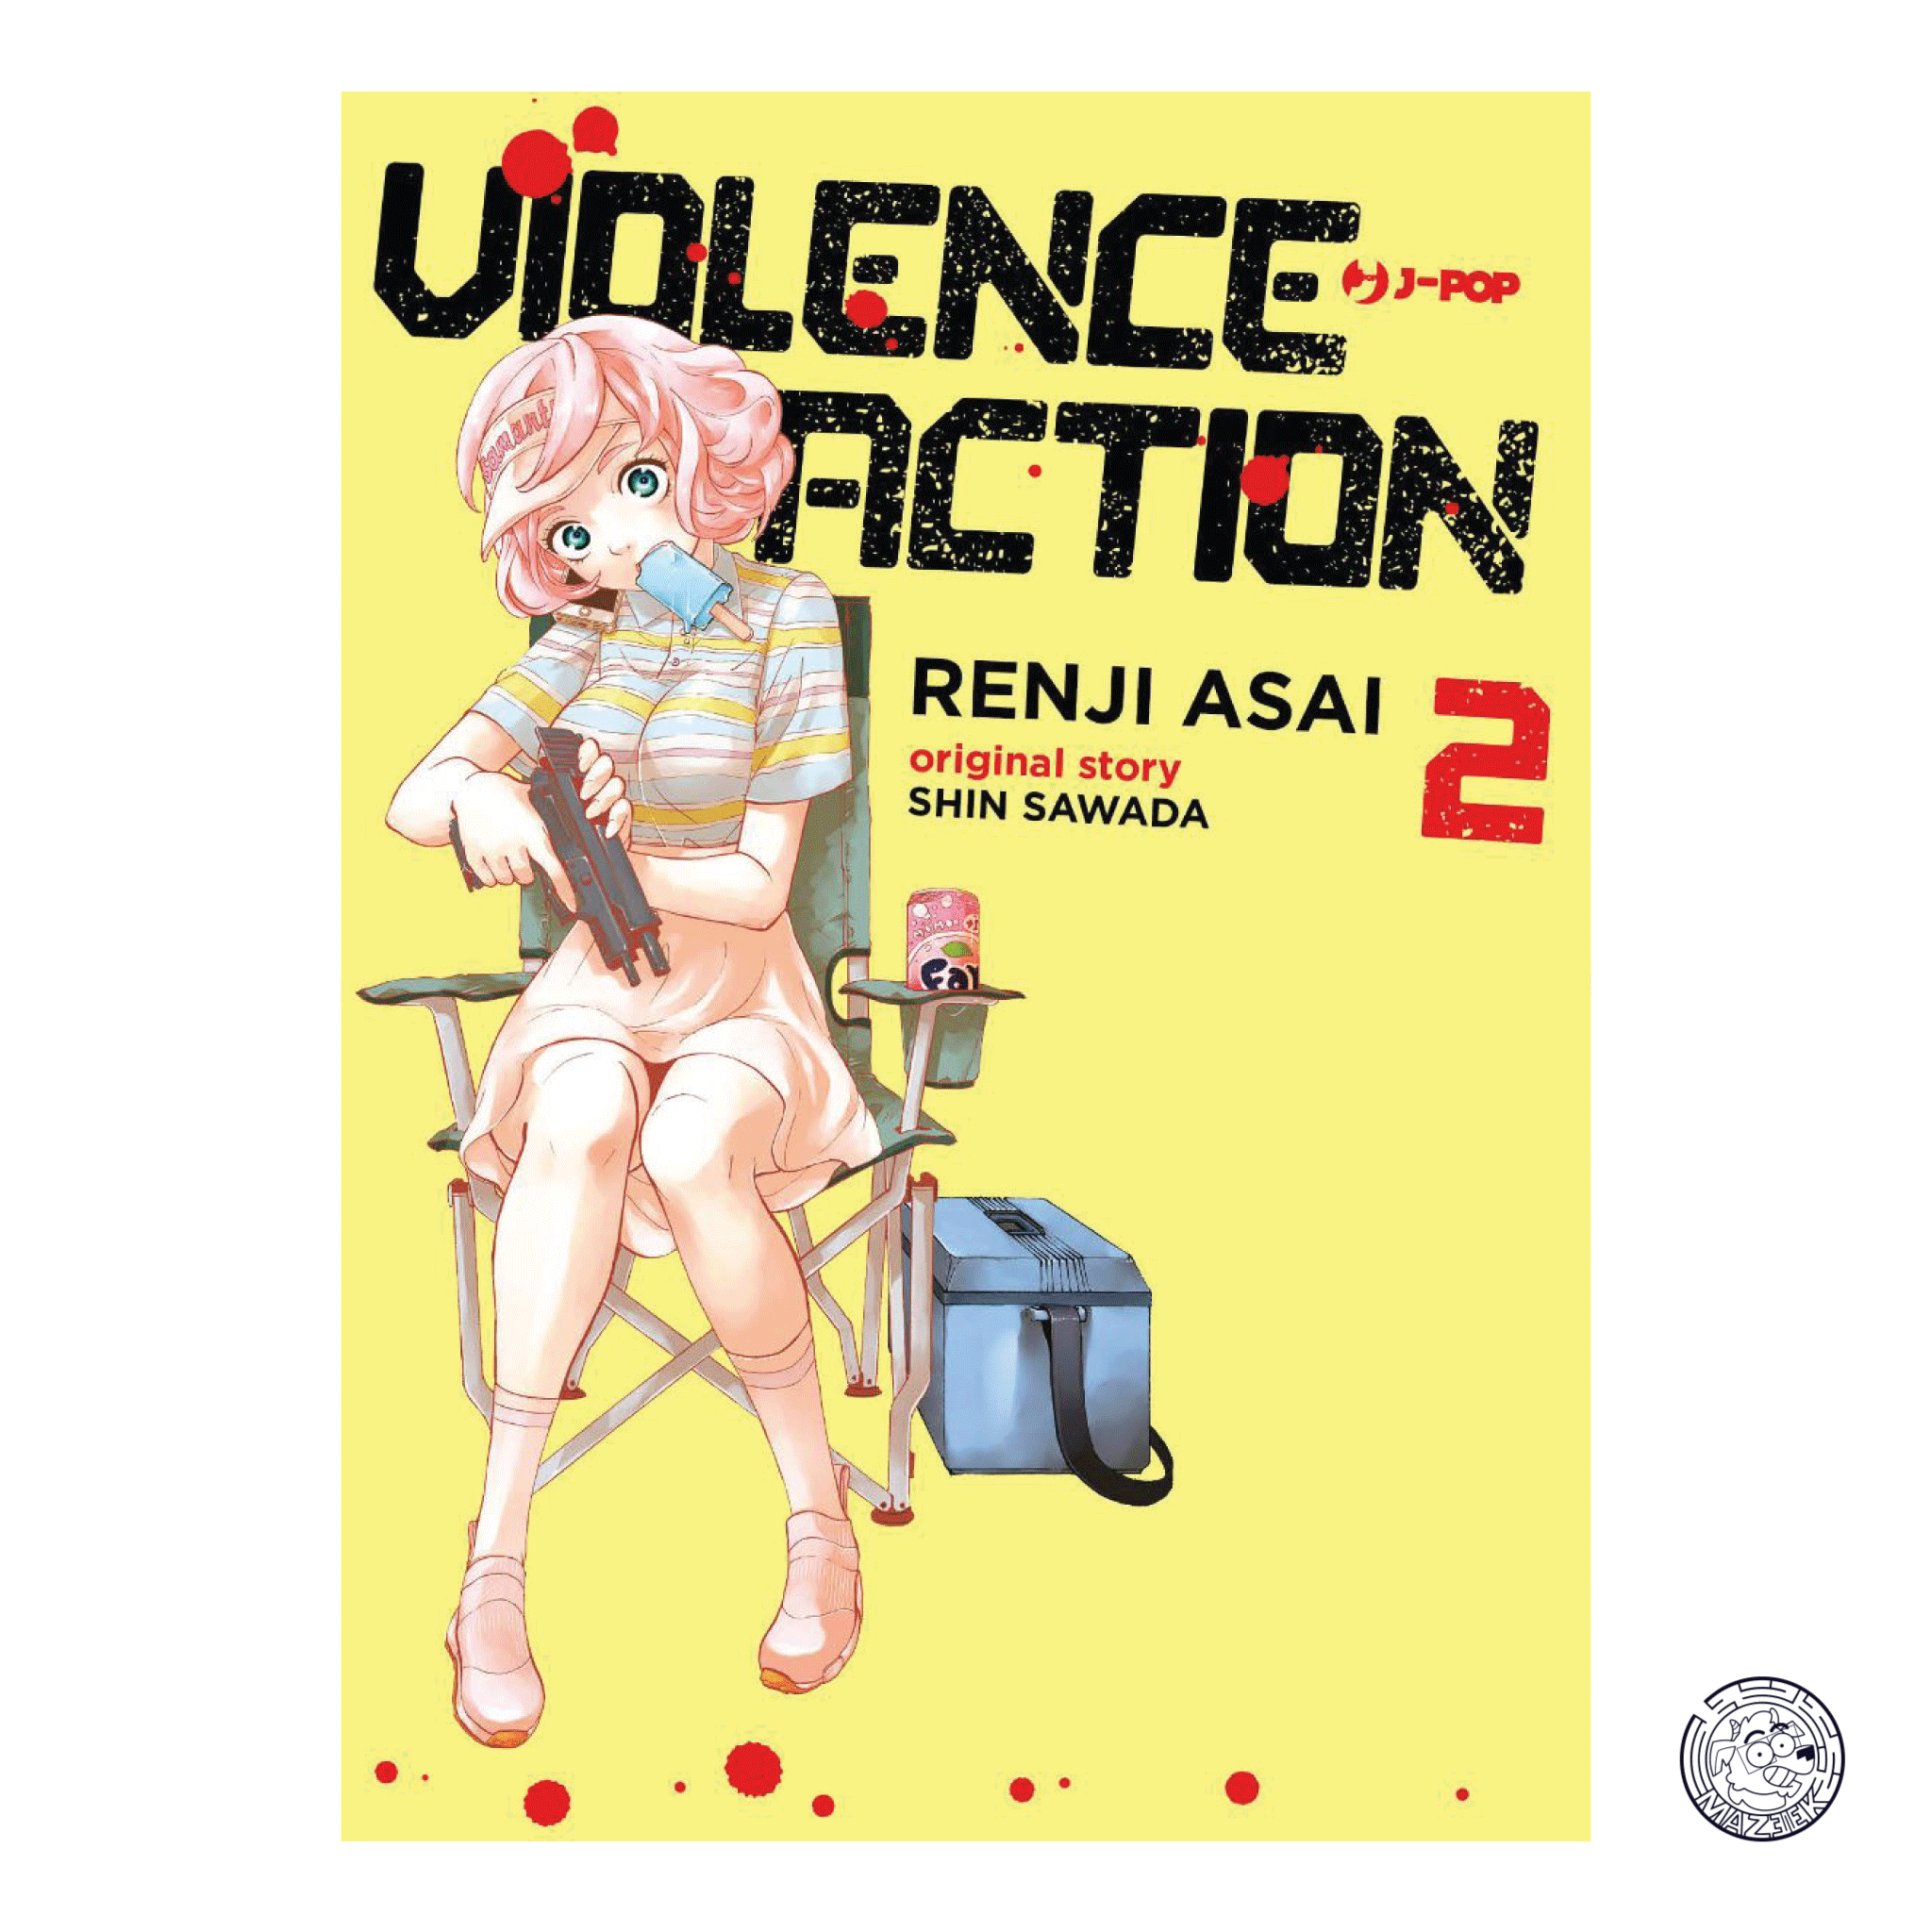 Violence Action 02